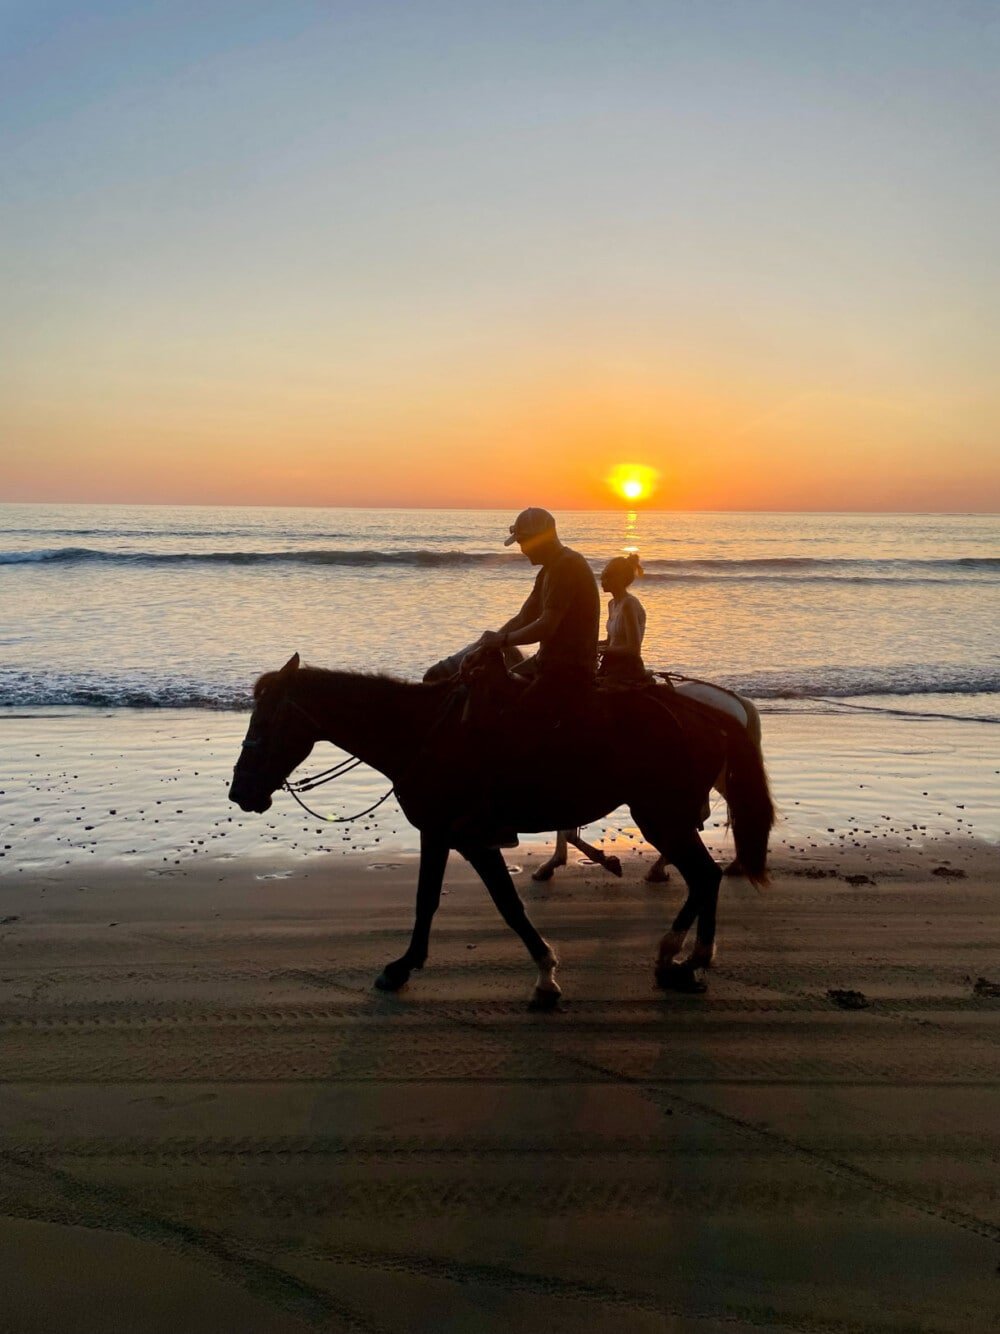 horse back riding on a beach in costa rica at sunset